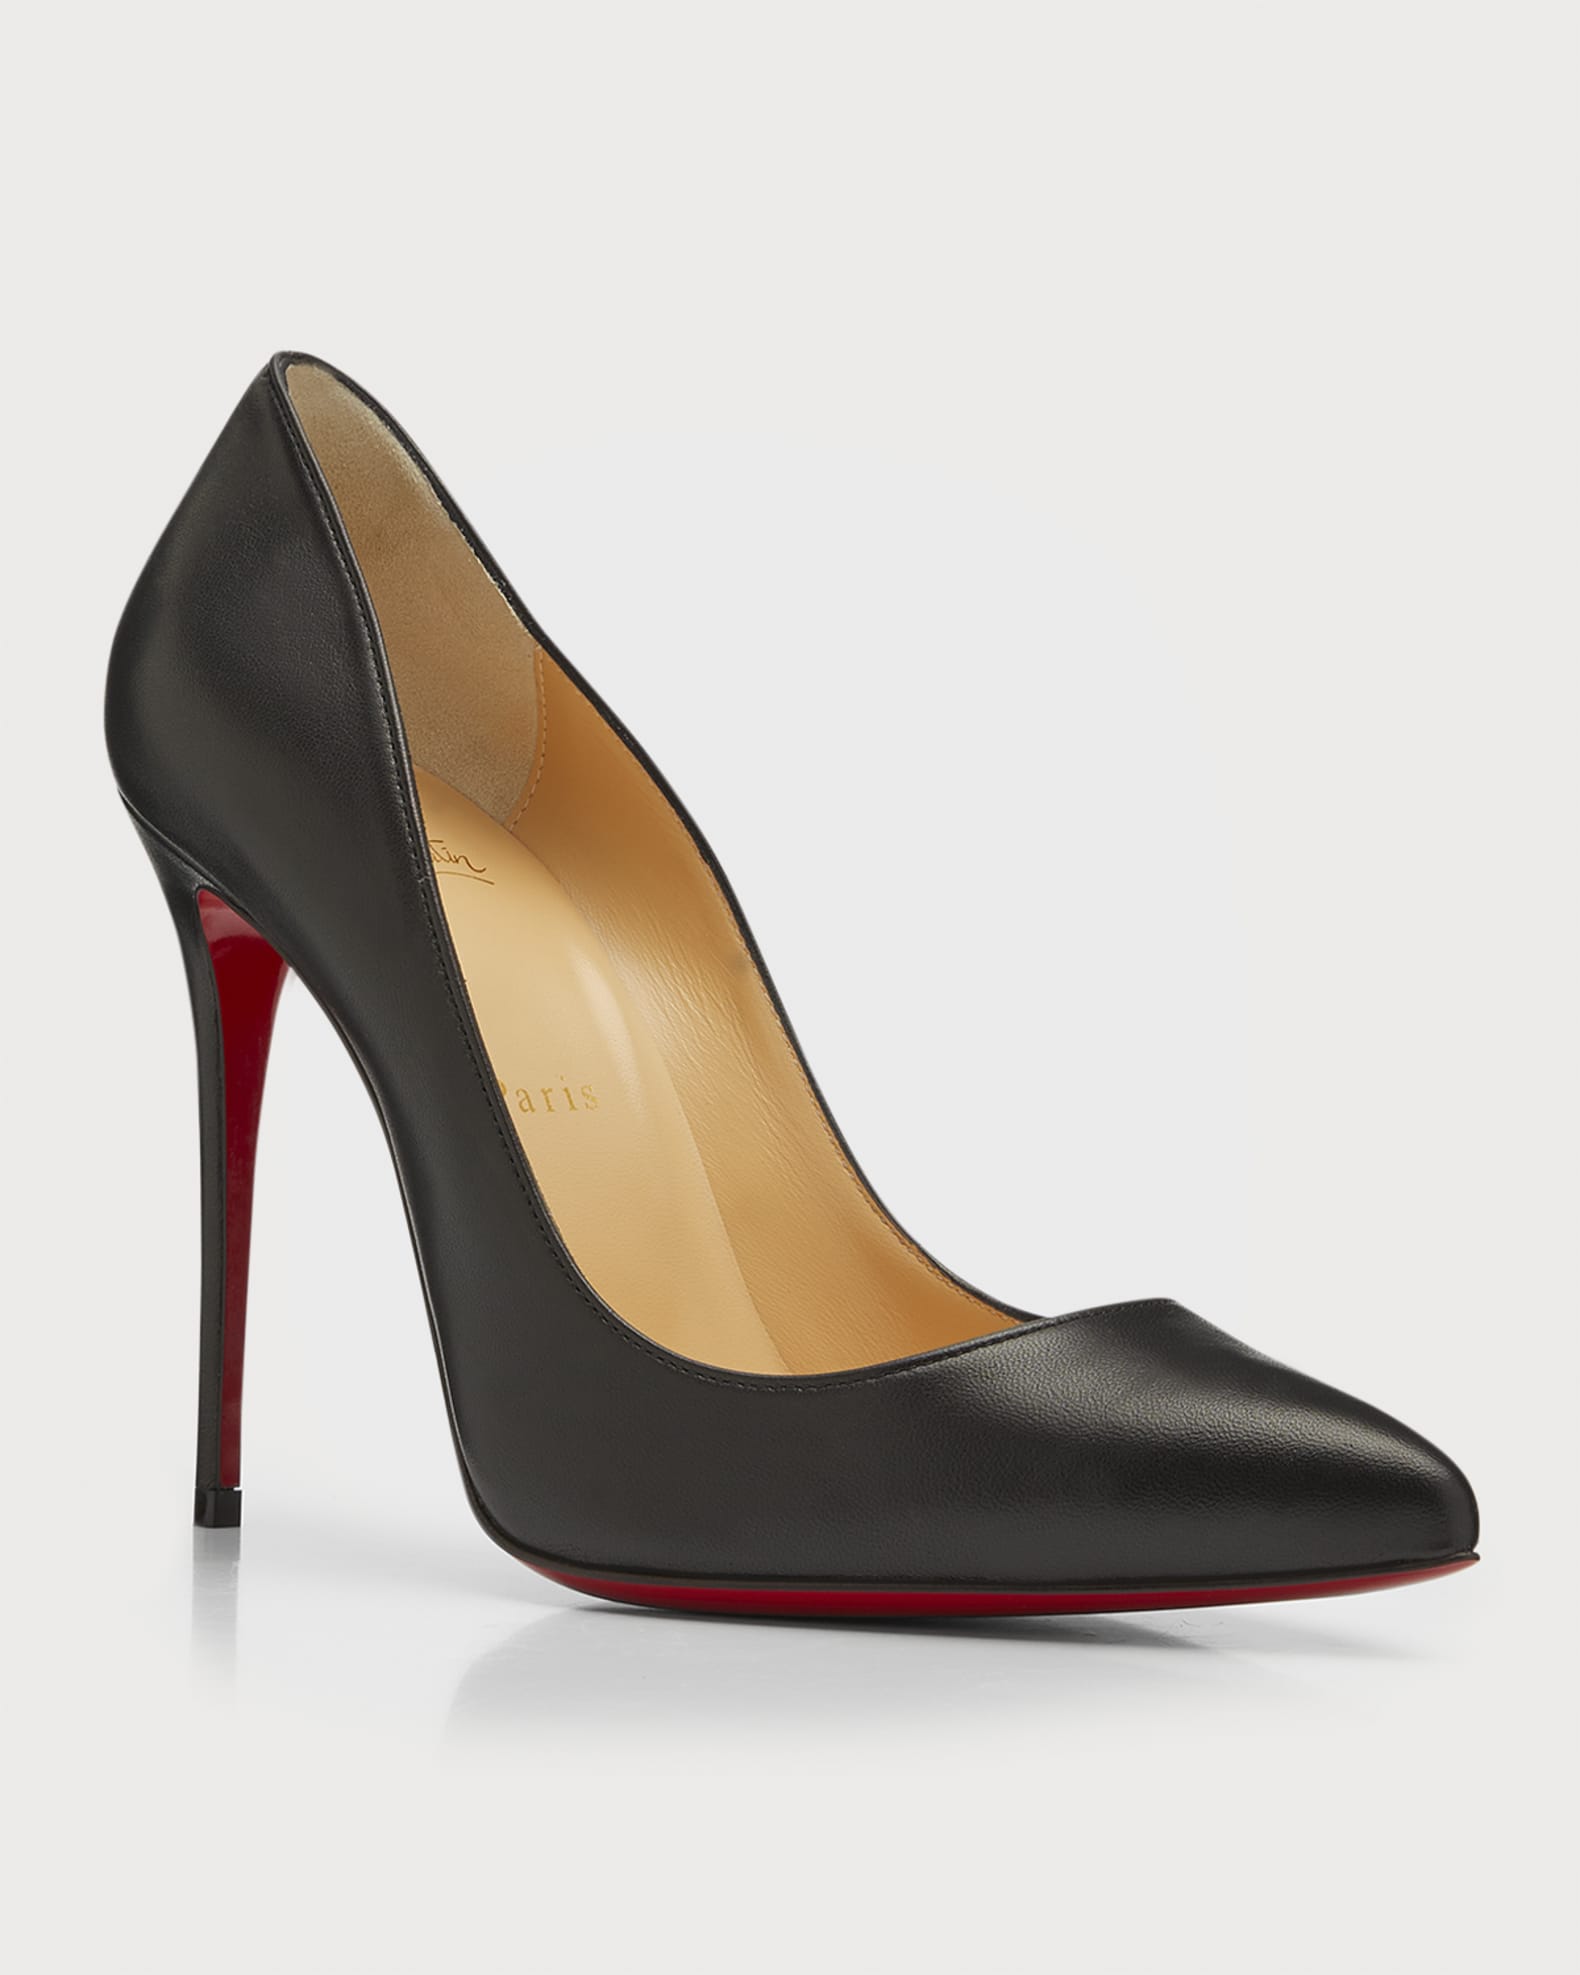 Gallery For Red Bottom Louis Vuitton Heels  Christian louboutin, Louis  vuitton shoes heels, Louis vuitton red bottoms